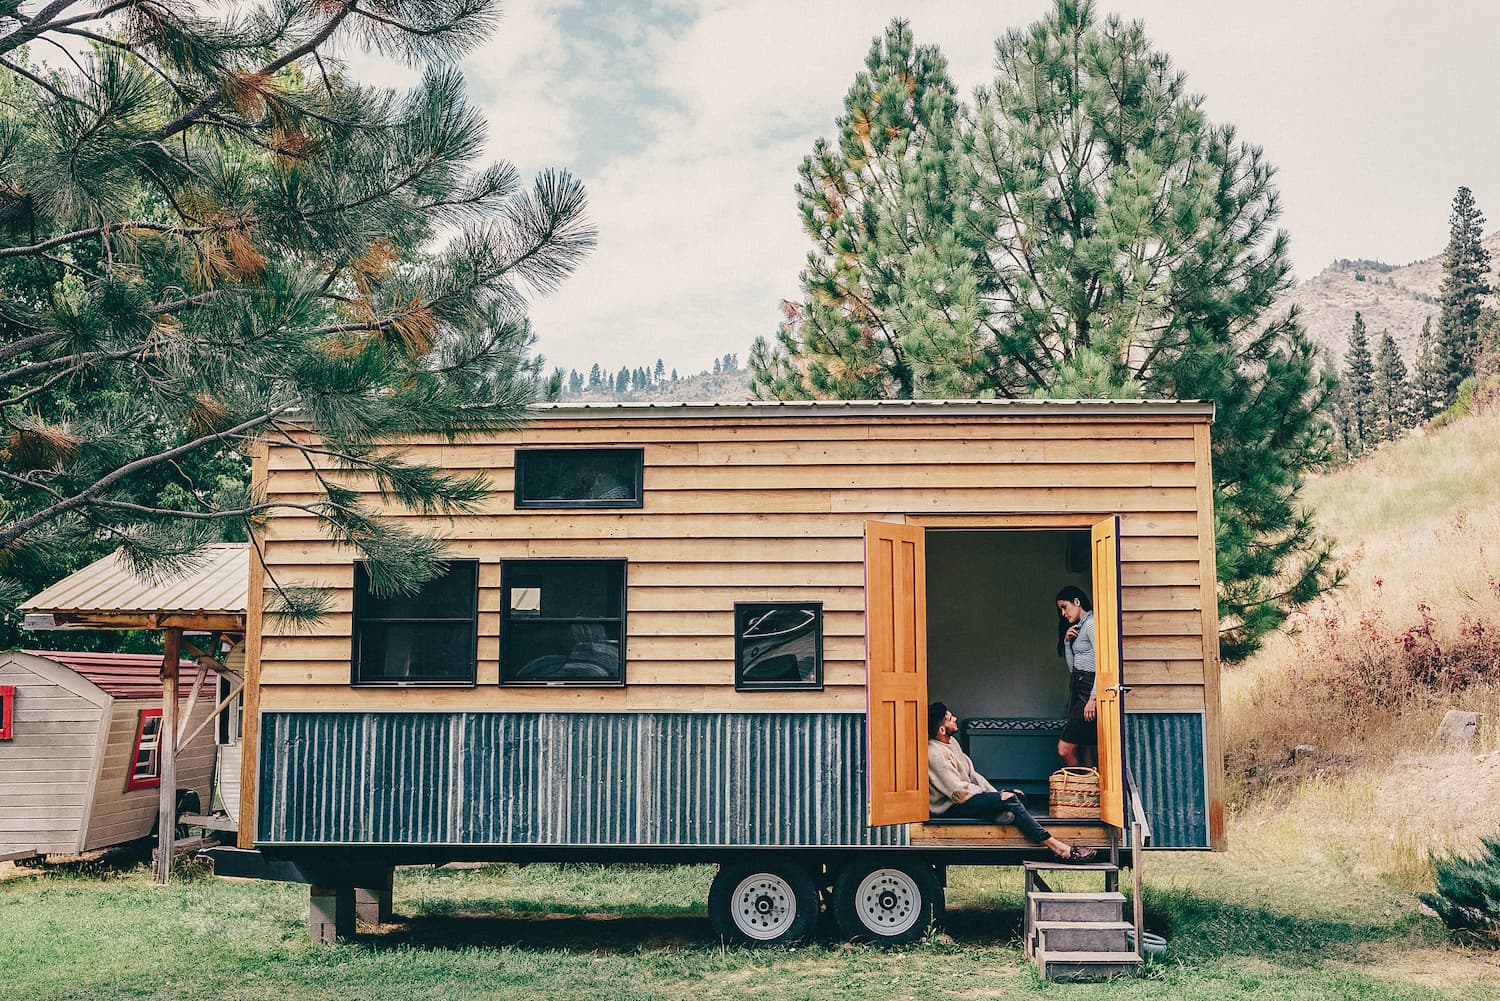 Man and woman sitting in a tiny house.